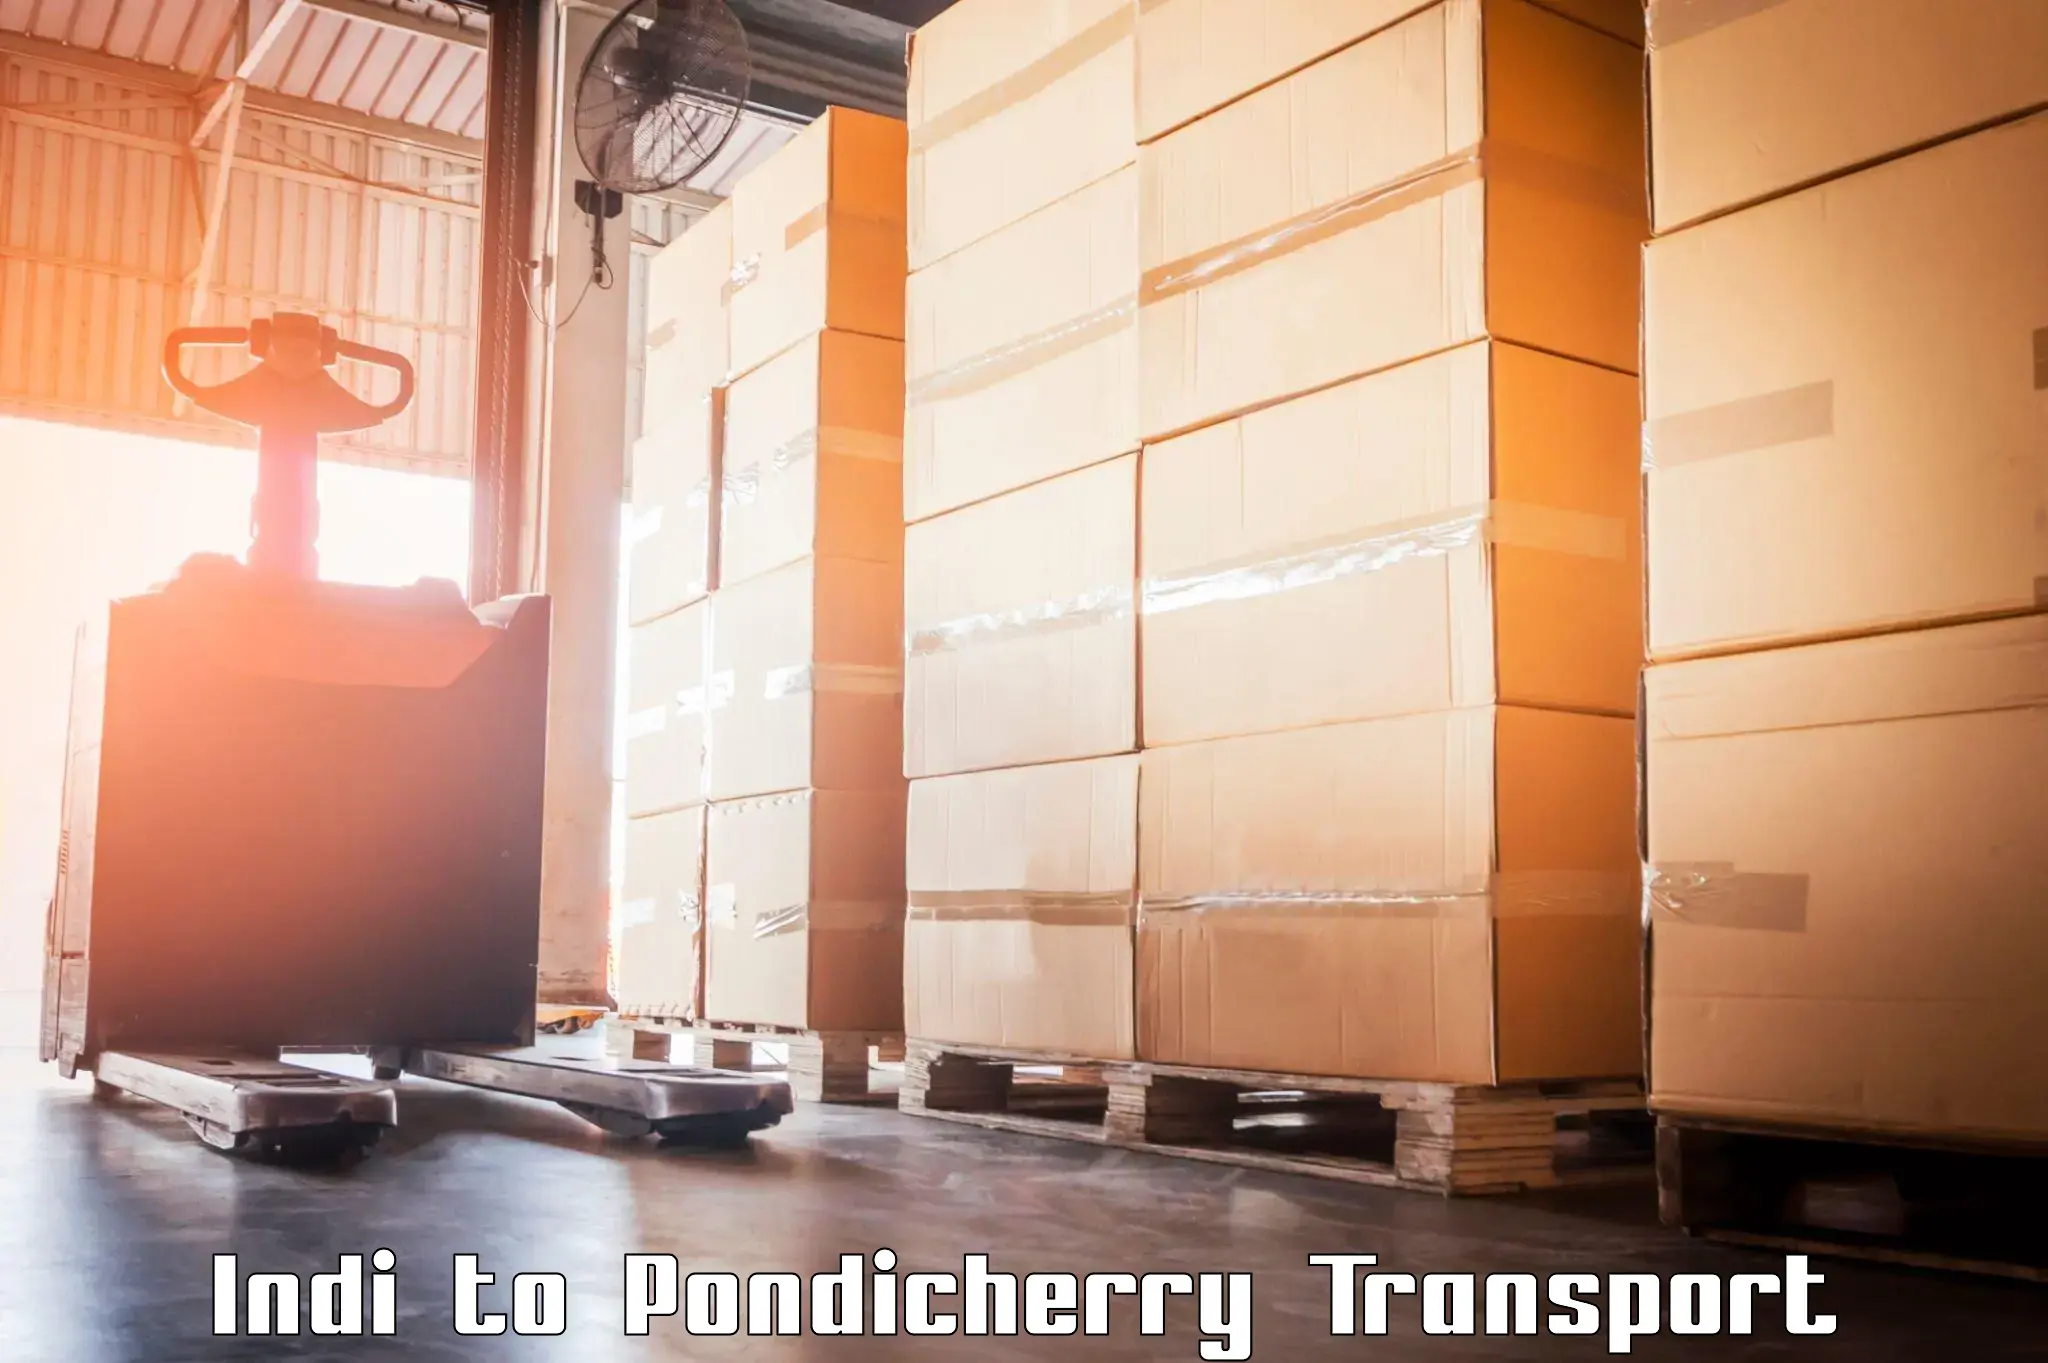 Parcel transport services in Indi to Pondicherry